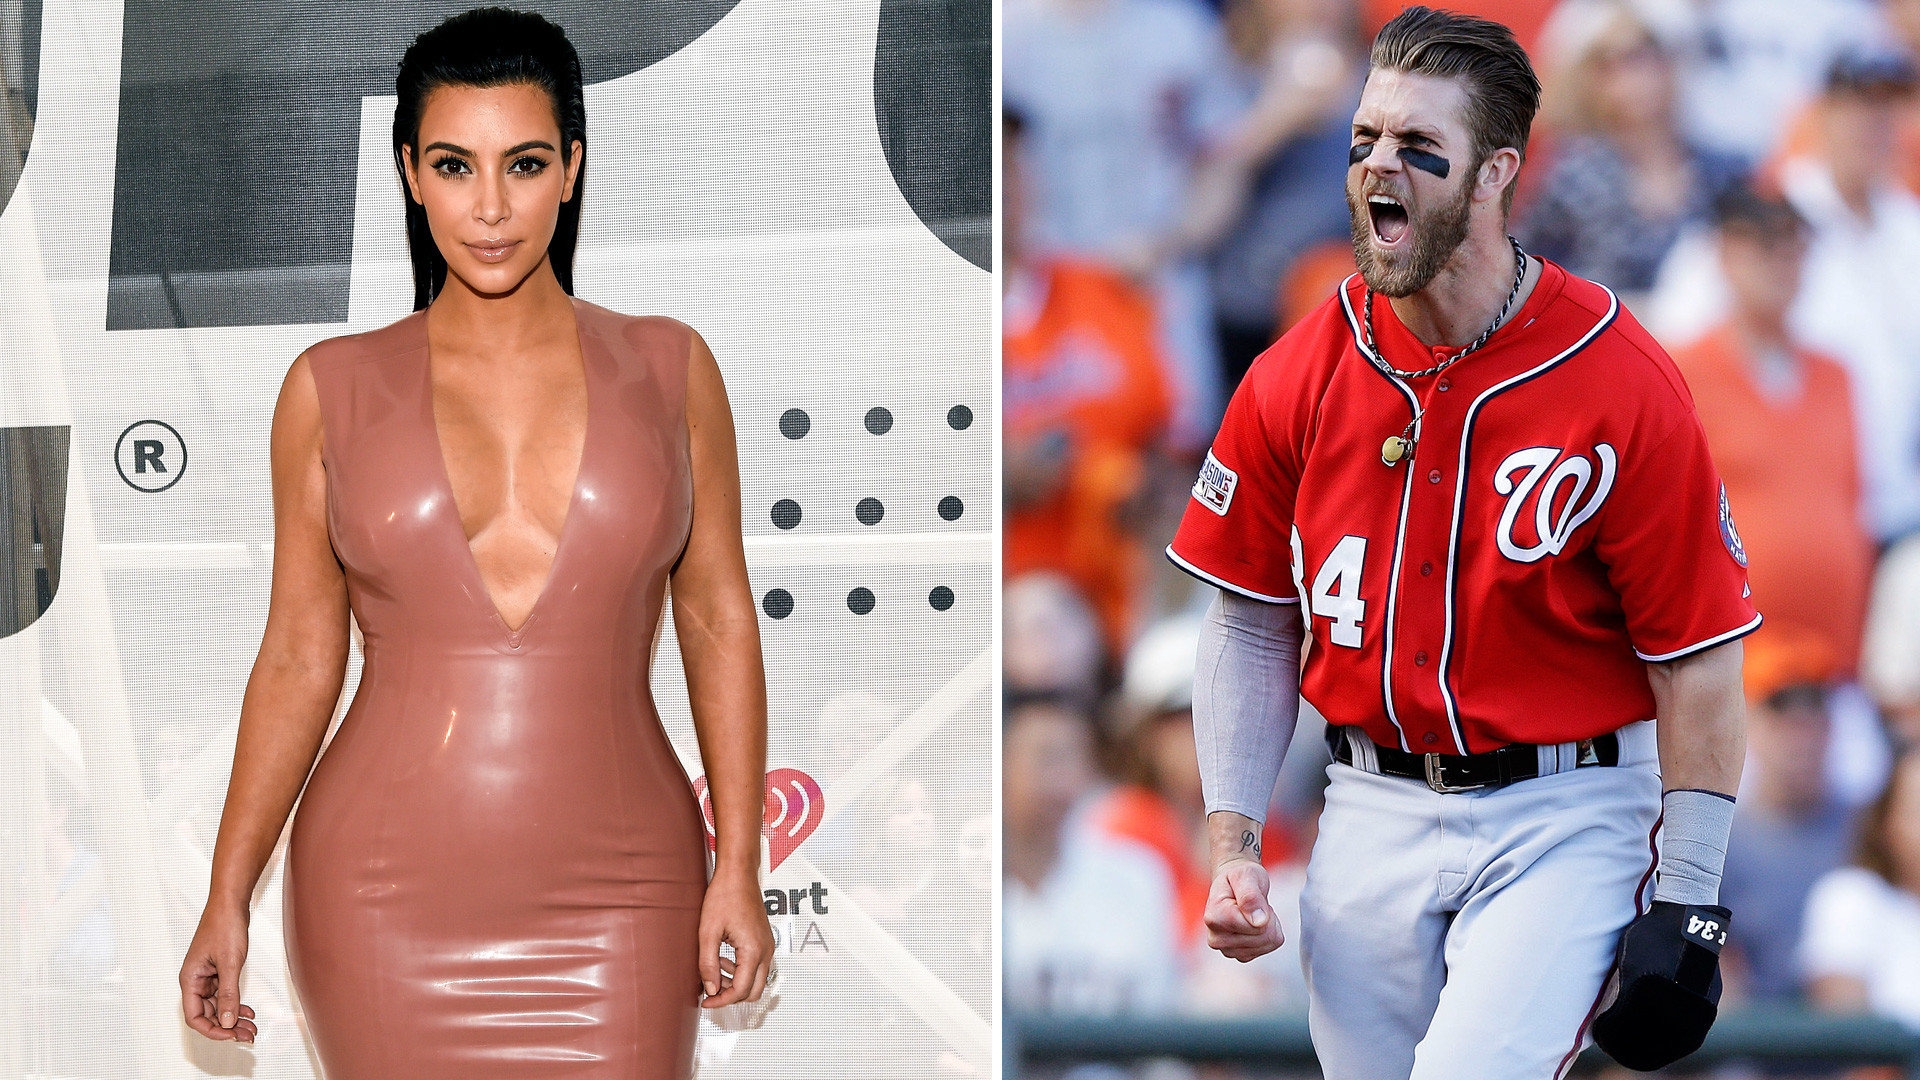 We should just shut up and let Bryce be Bryce and Kimmy be nude MLB Sporting News